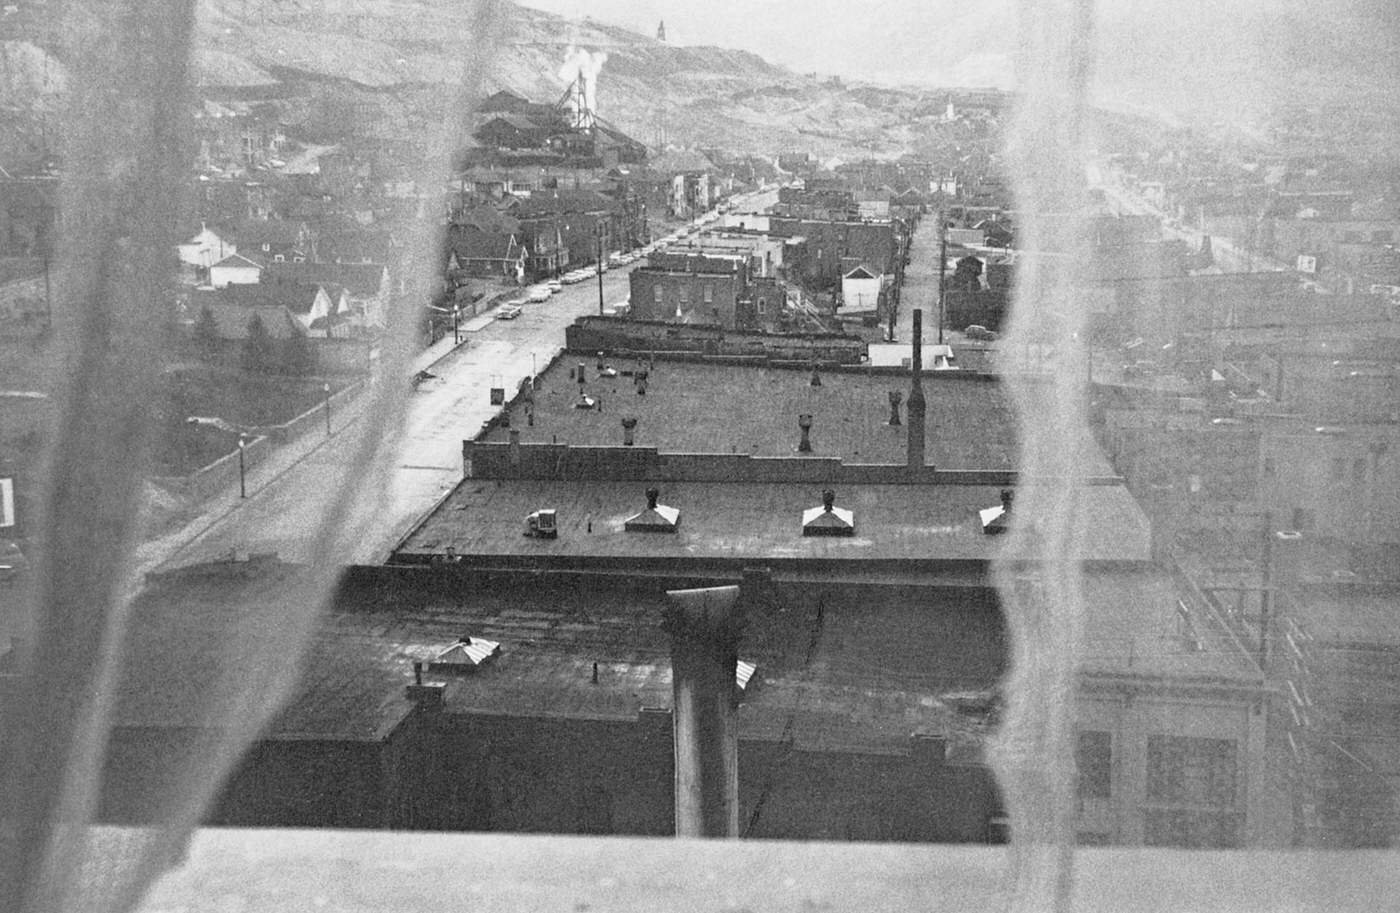 View from hotel window in Butte, Montana, 1955